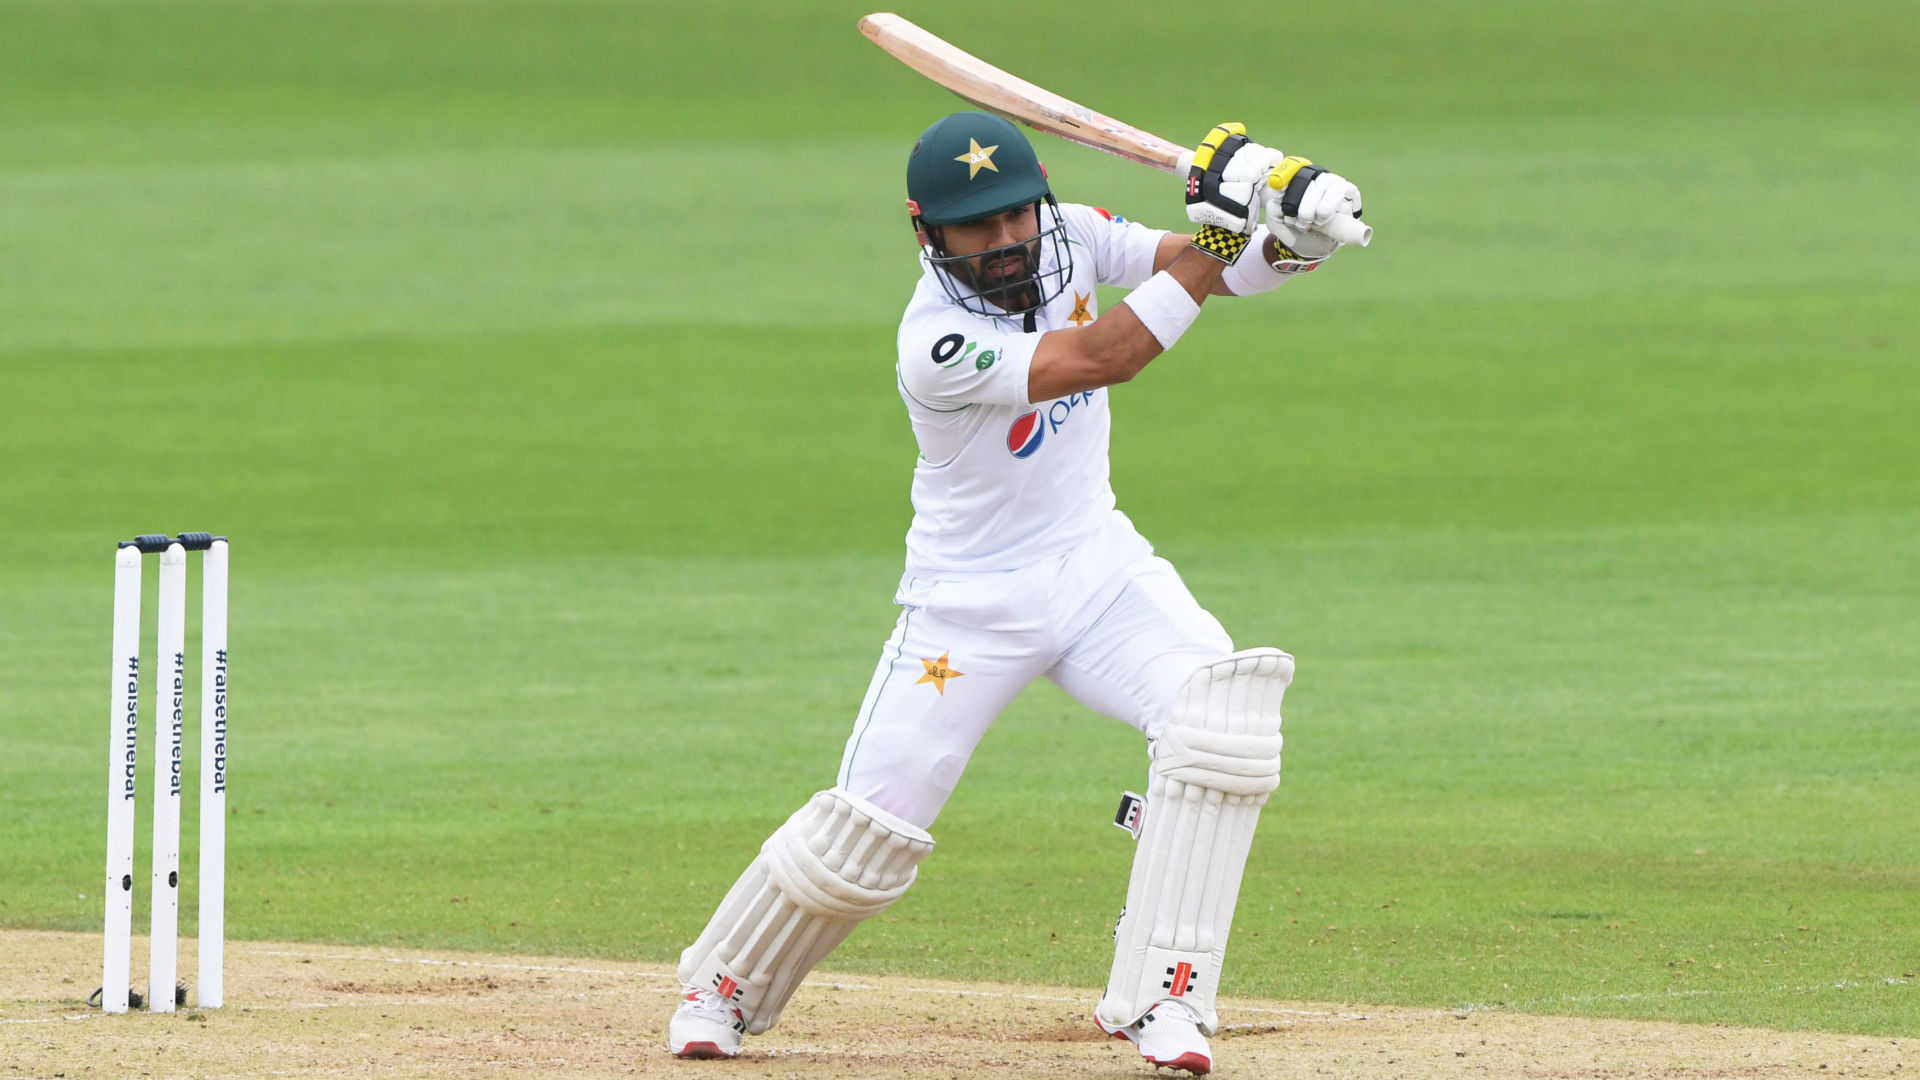 Mohammad Rizwan hit an unbeaten 60 as Pakistan reached 223-9 before bad light cut short Friday's play at the Rose Bowl.